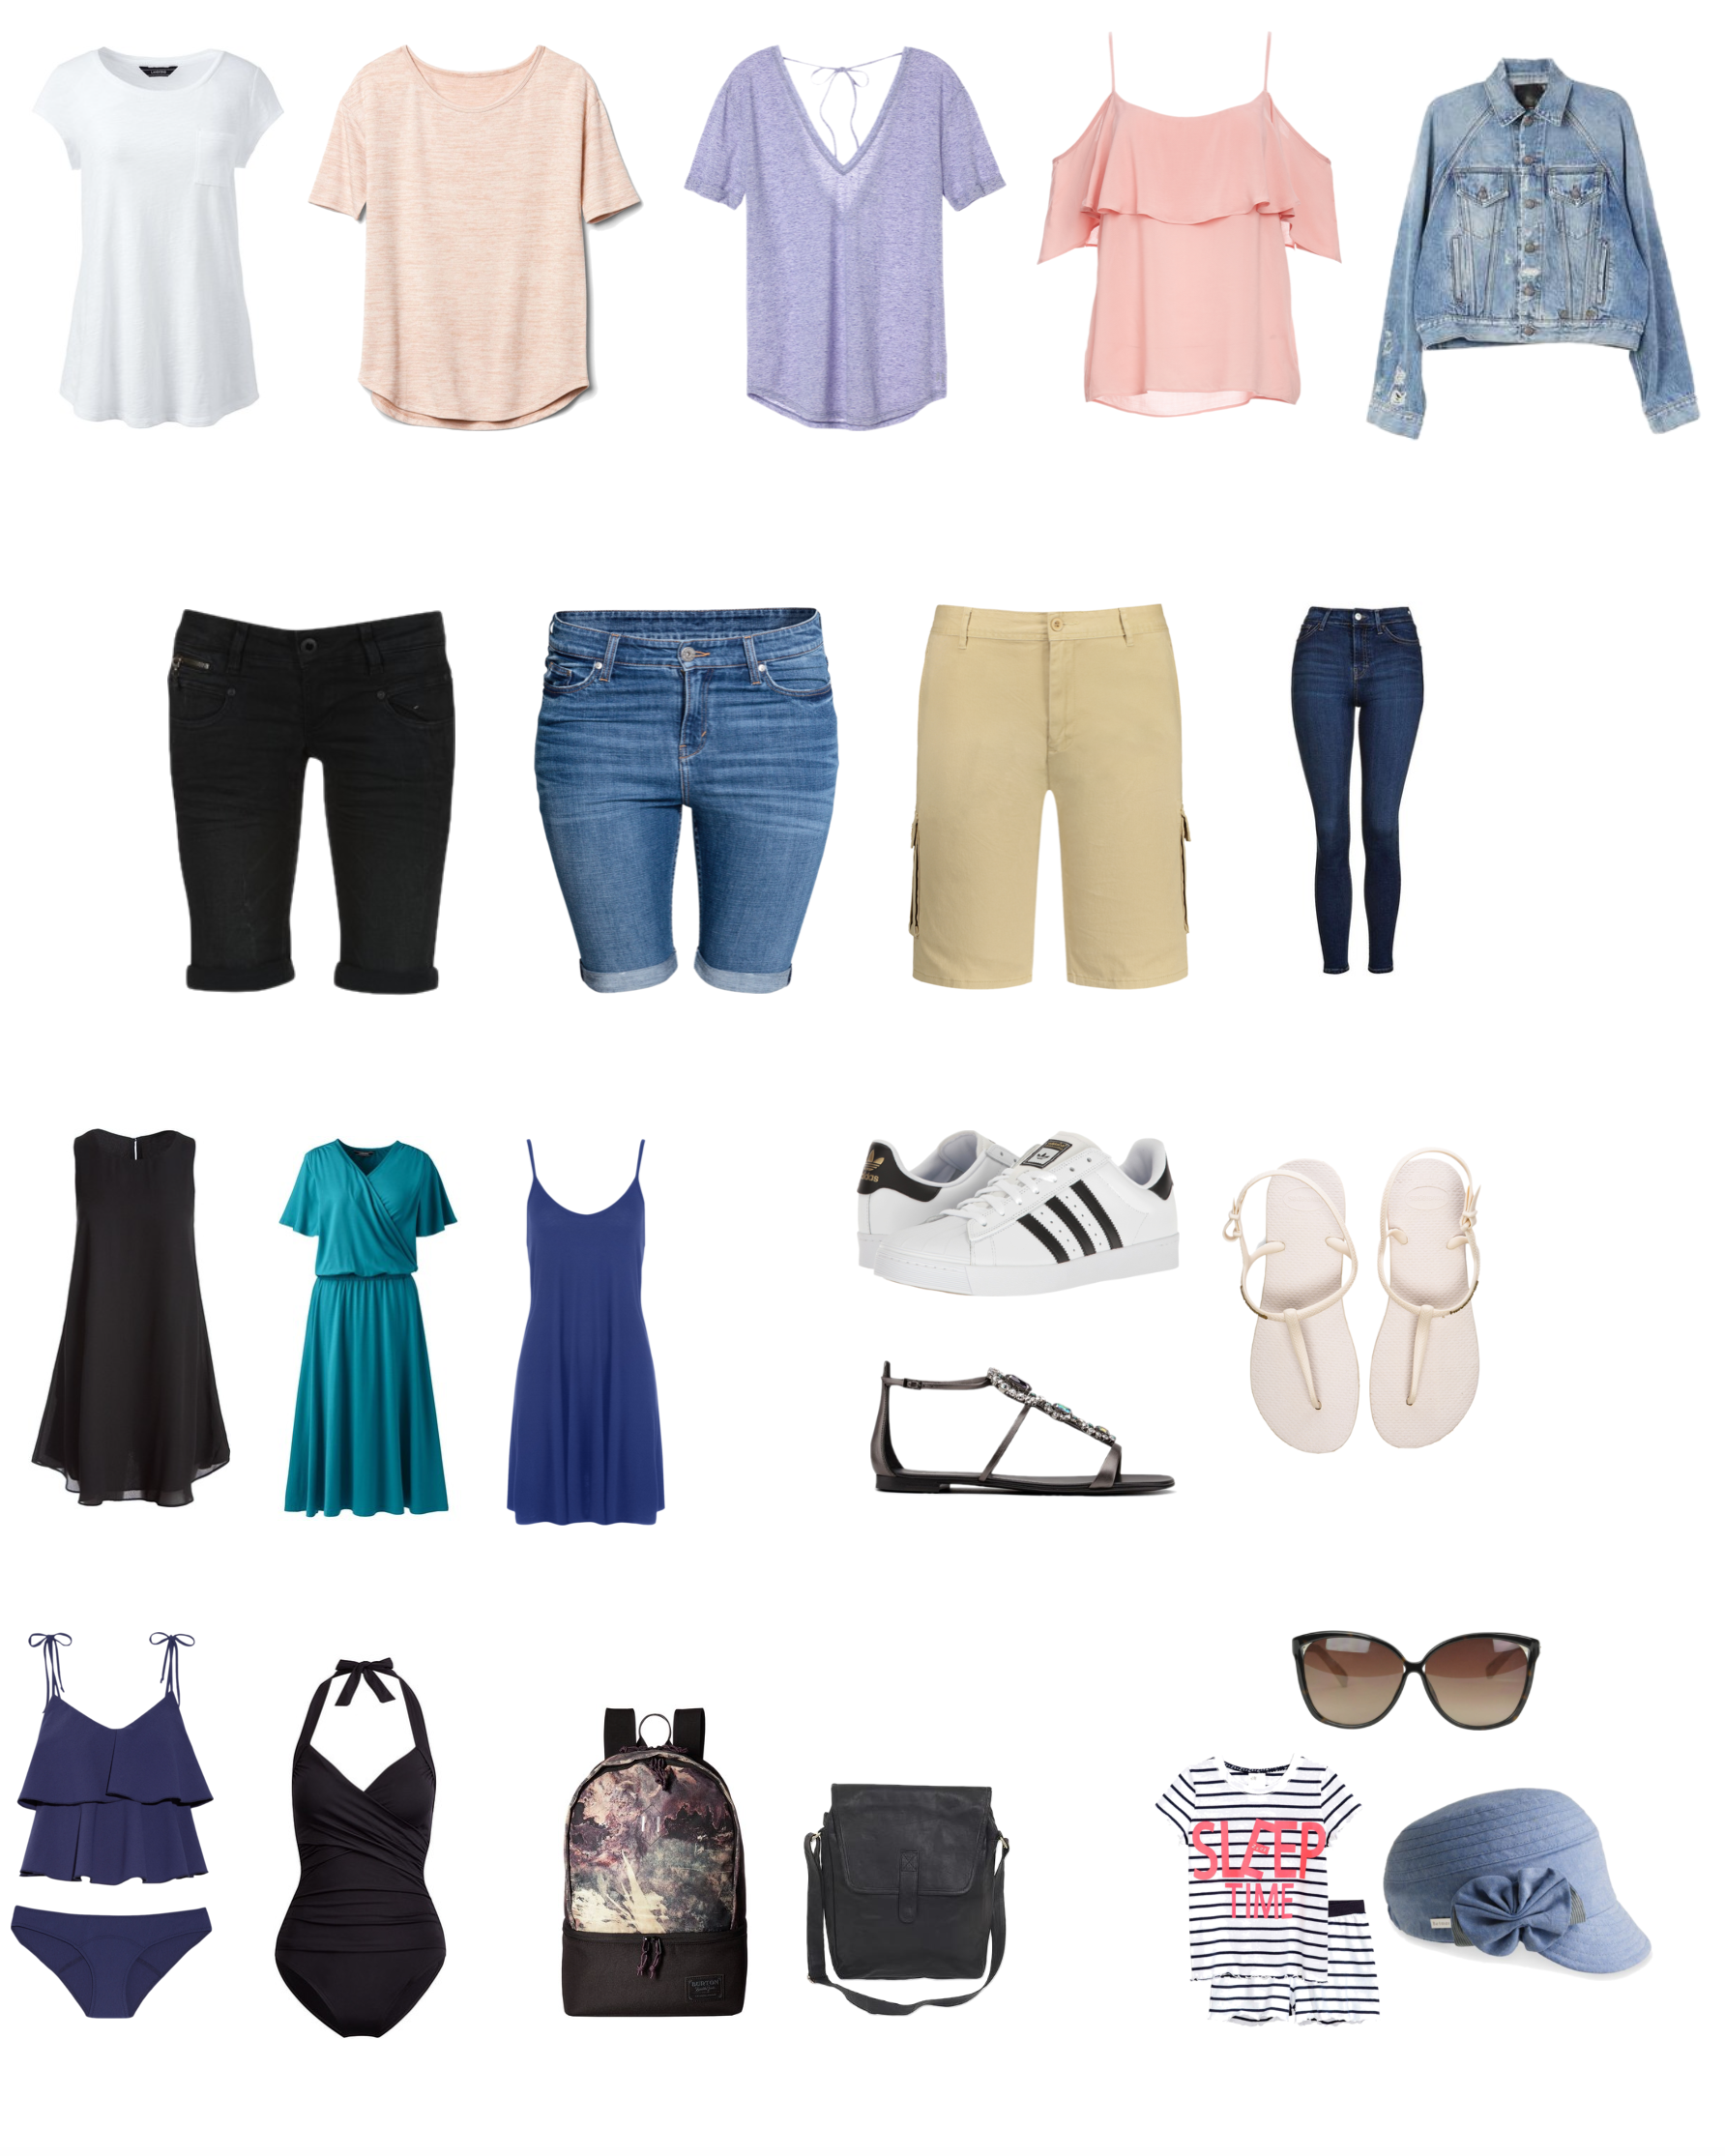 These are not my items - it is merely an example of what to pack (it was created with Polyvore)